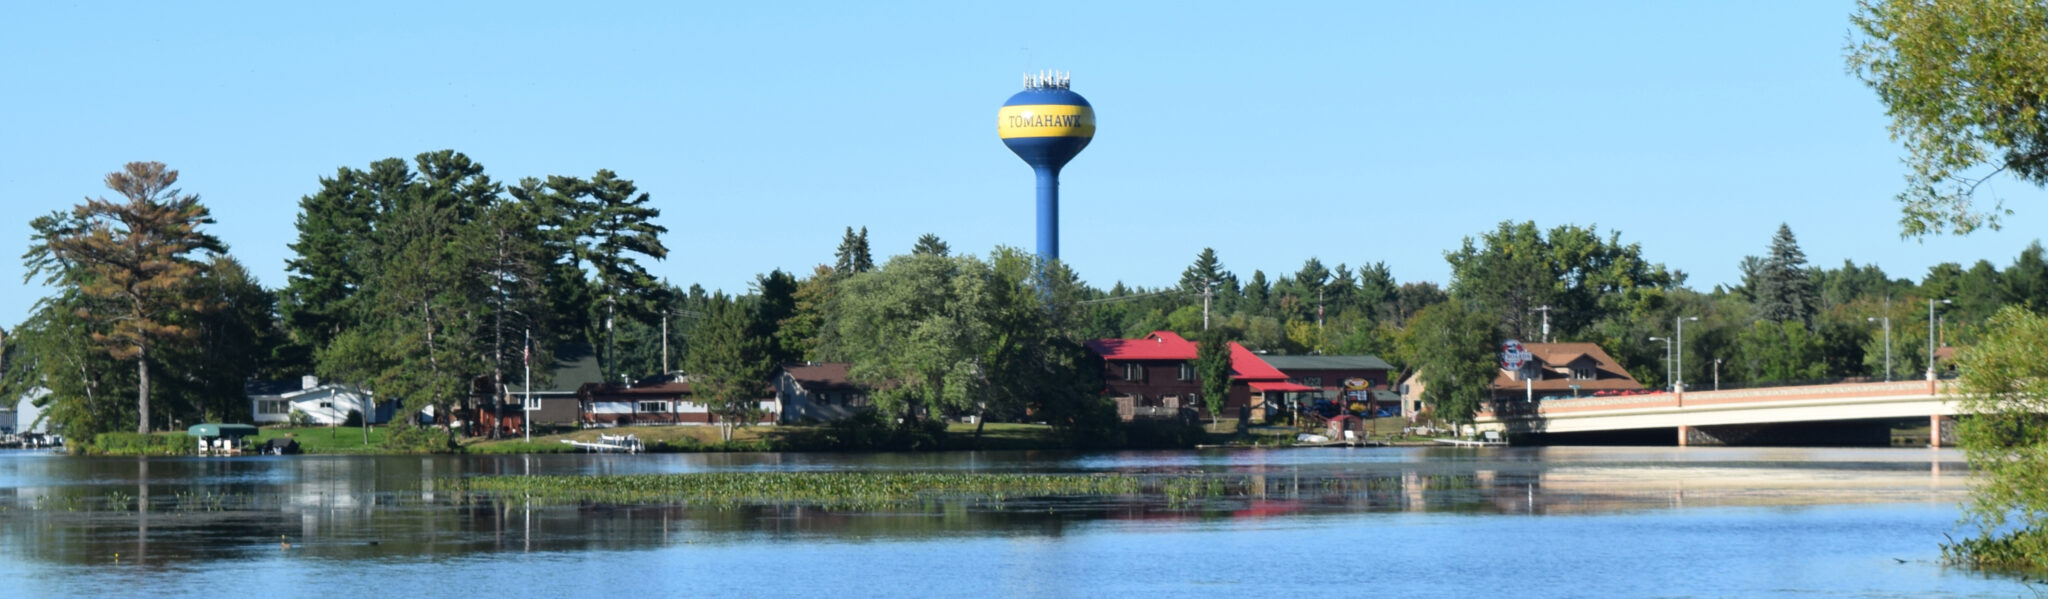 City of Tomahawk’s water tower repainted